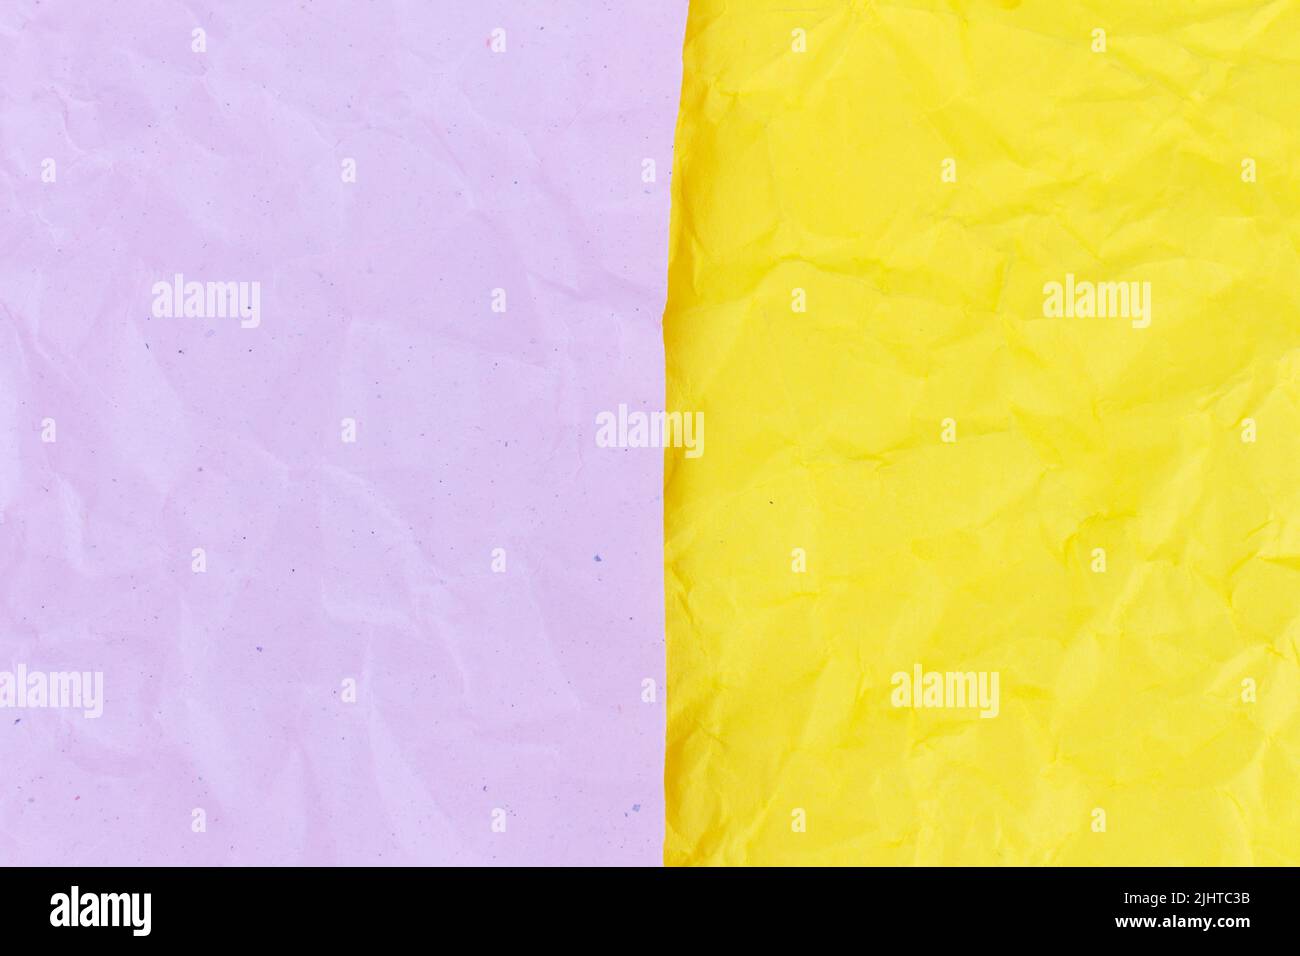 pink and yellow crumpled paper texture background. Stock Photo